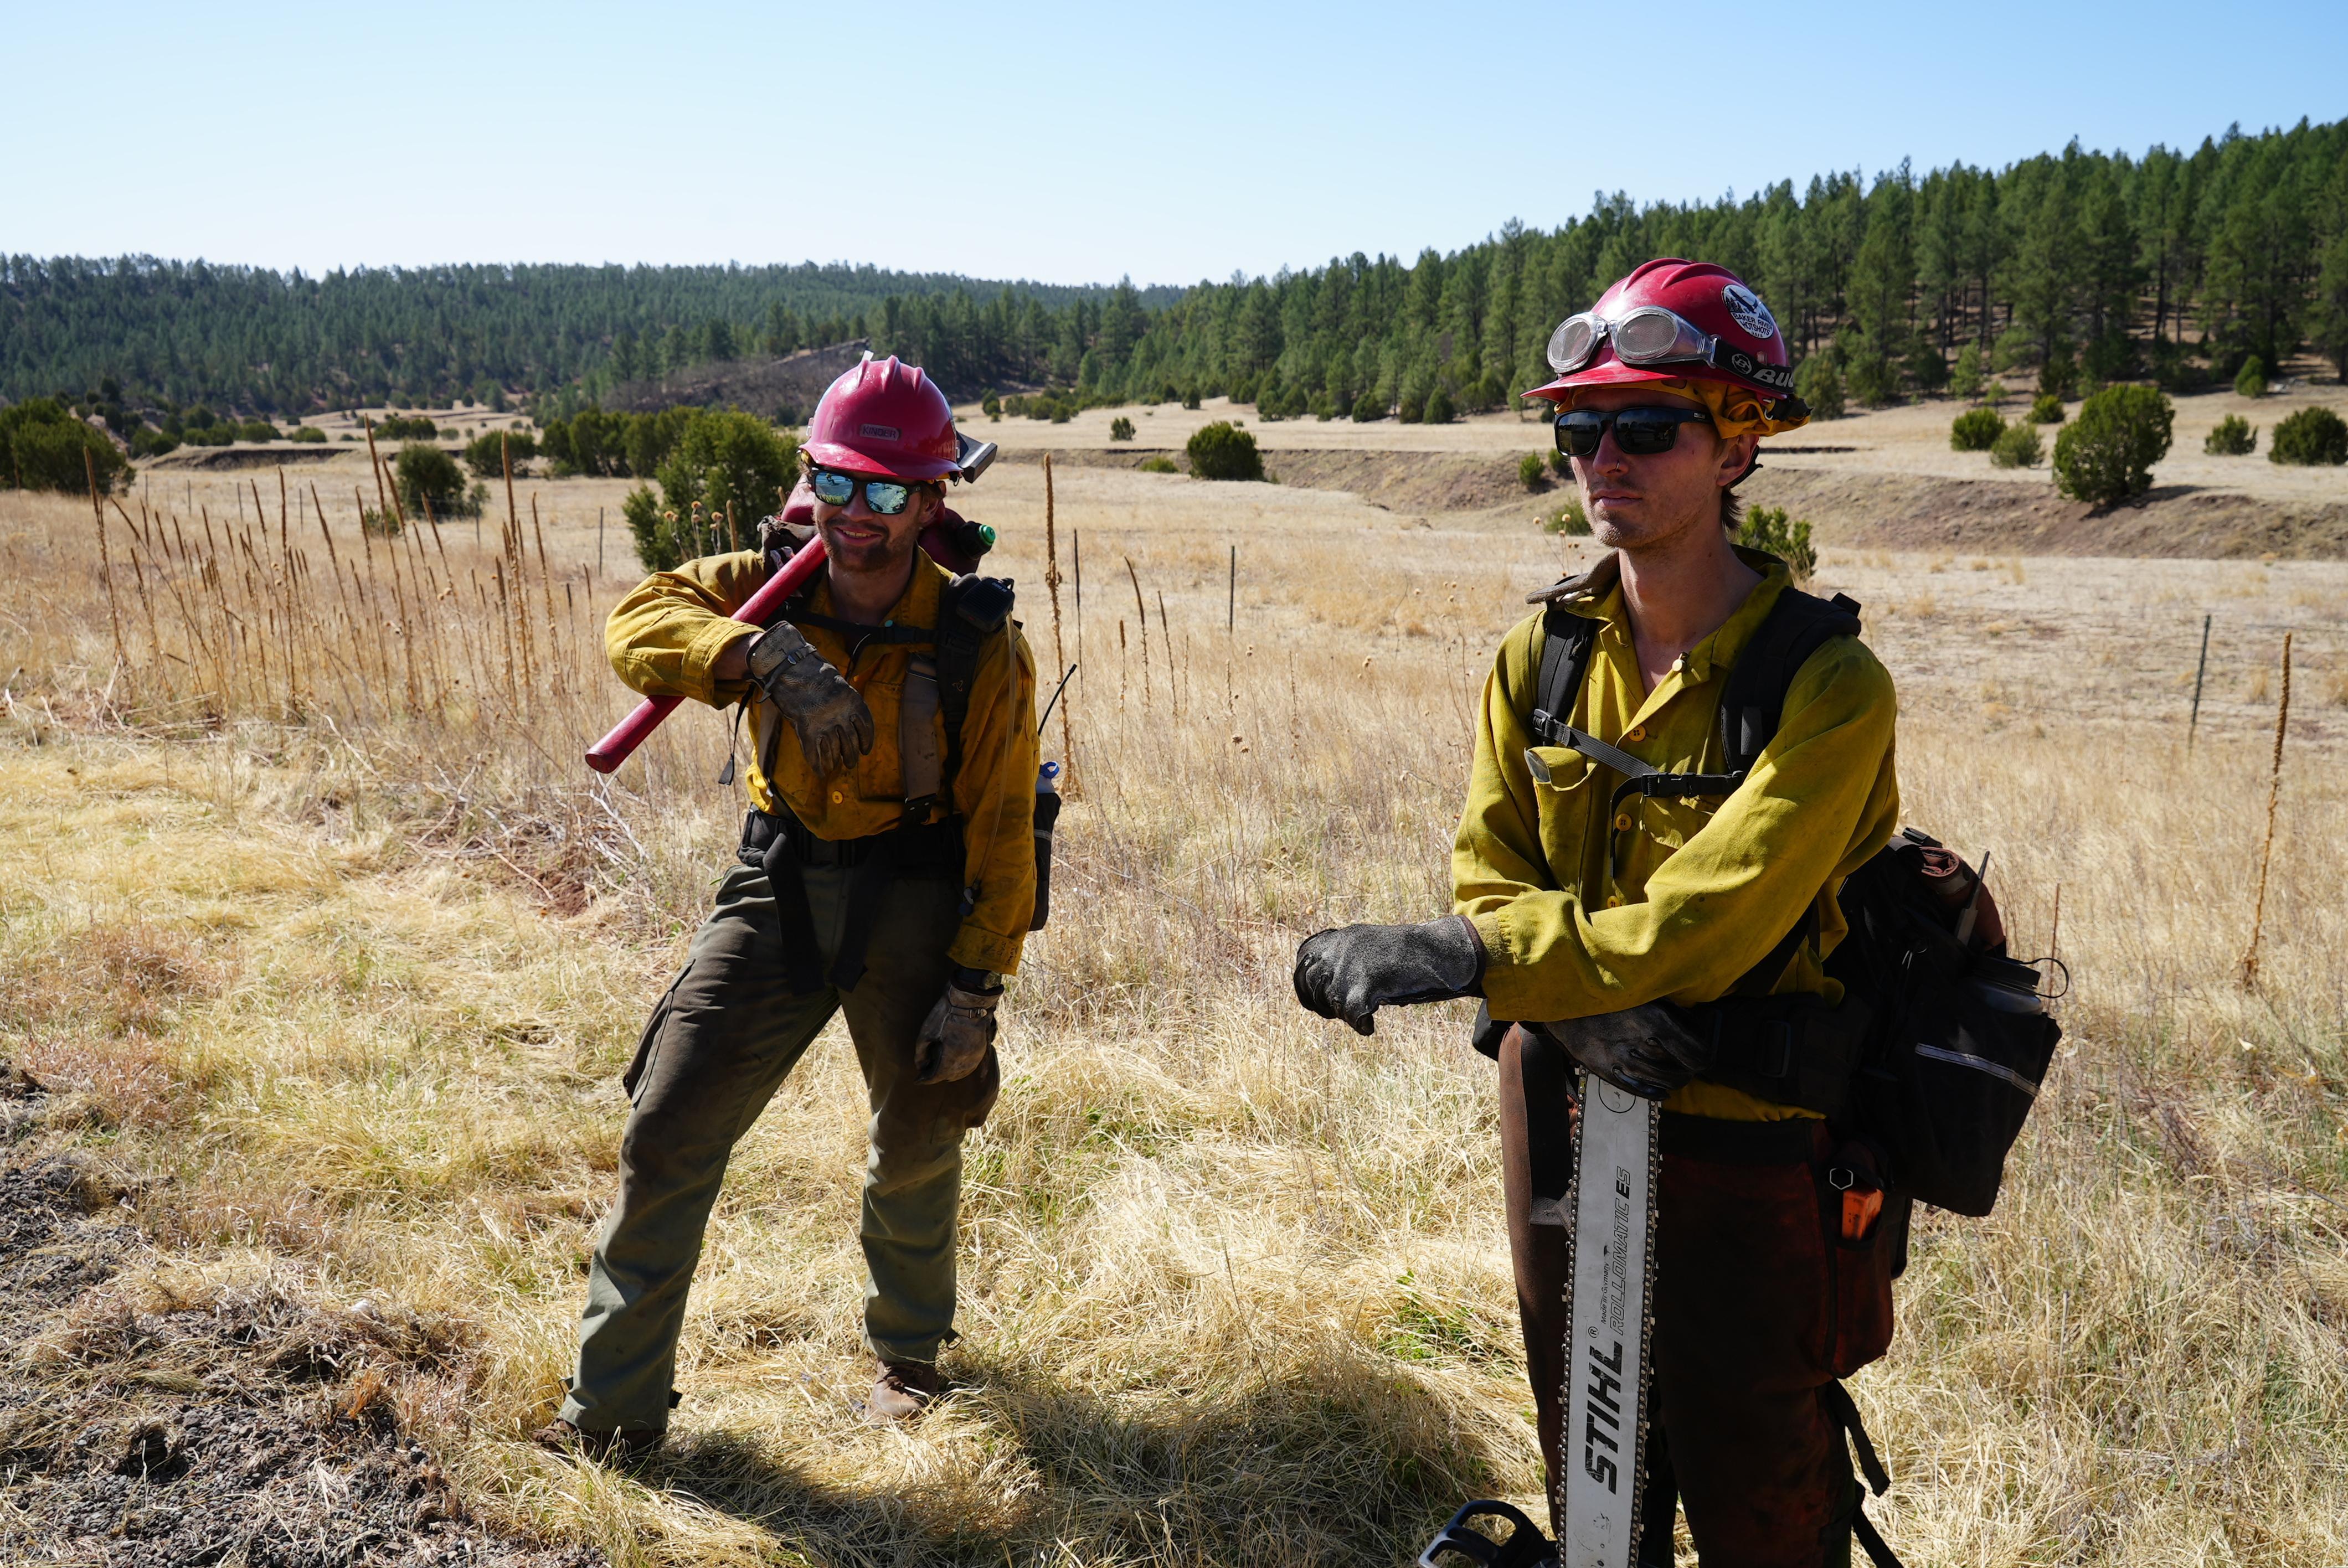 Members of the Baker River Hot Shots on the Hermits Peak and Calf Canyon Fires near Las Vegas New Mexico.